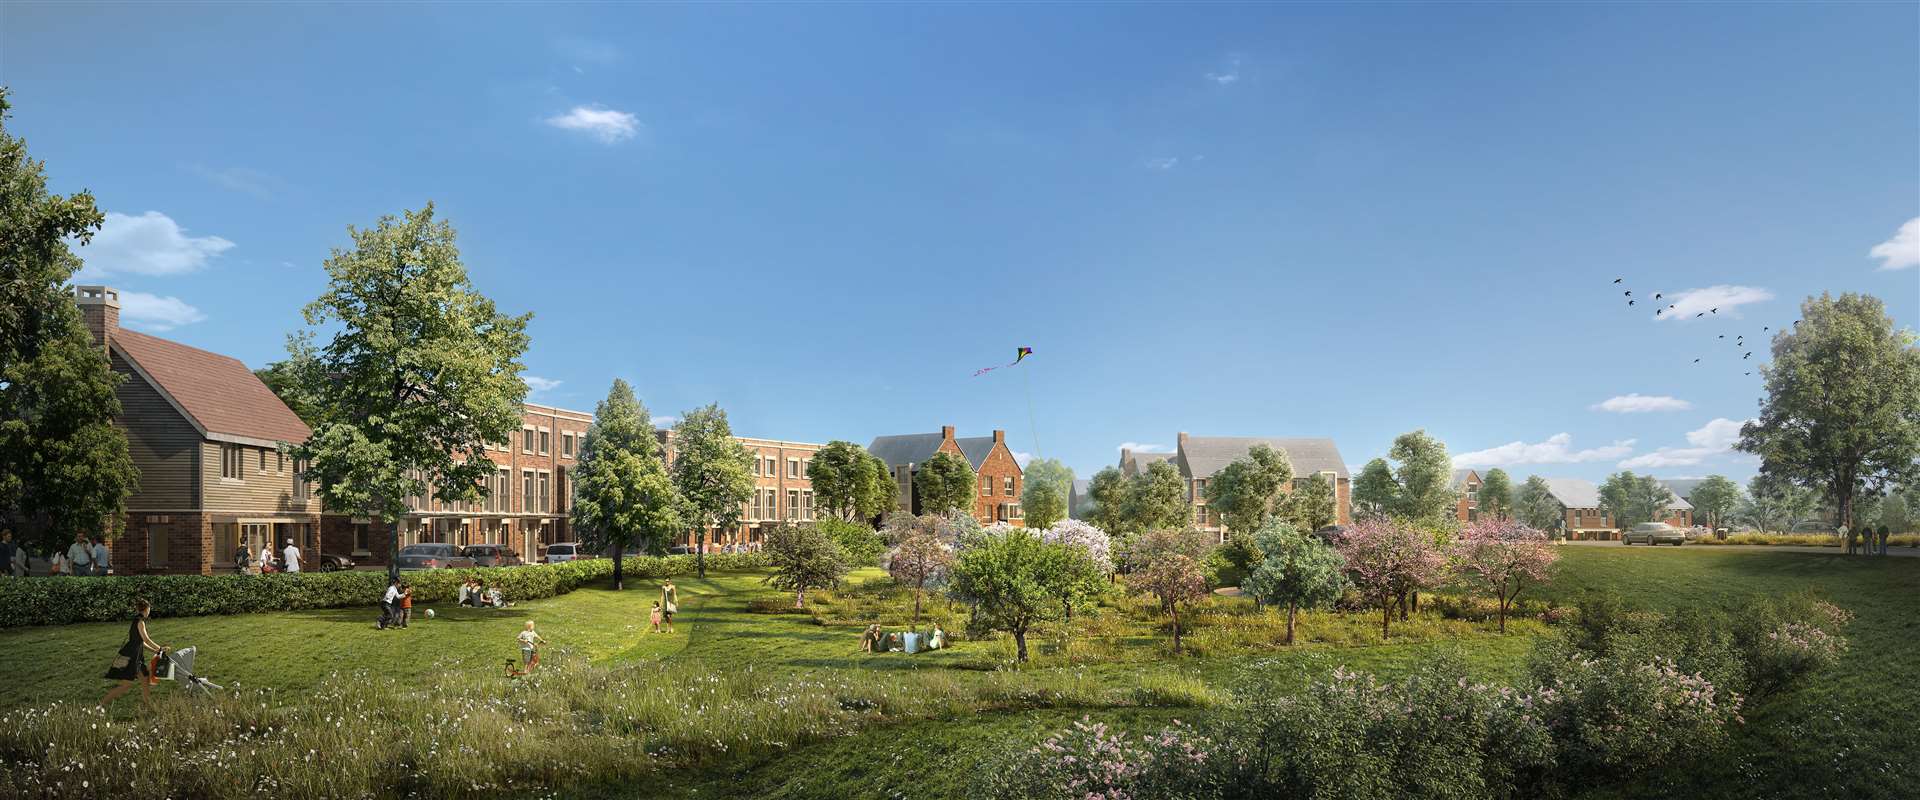 How Chilmington Green will look